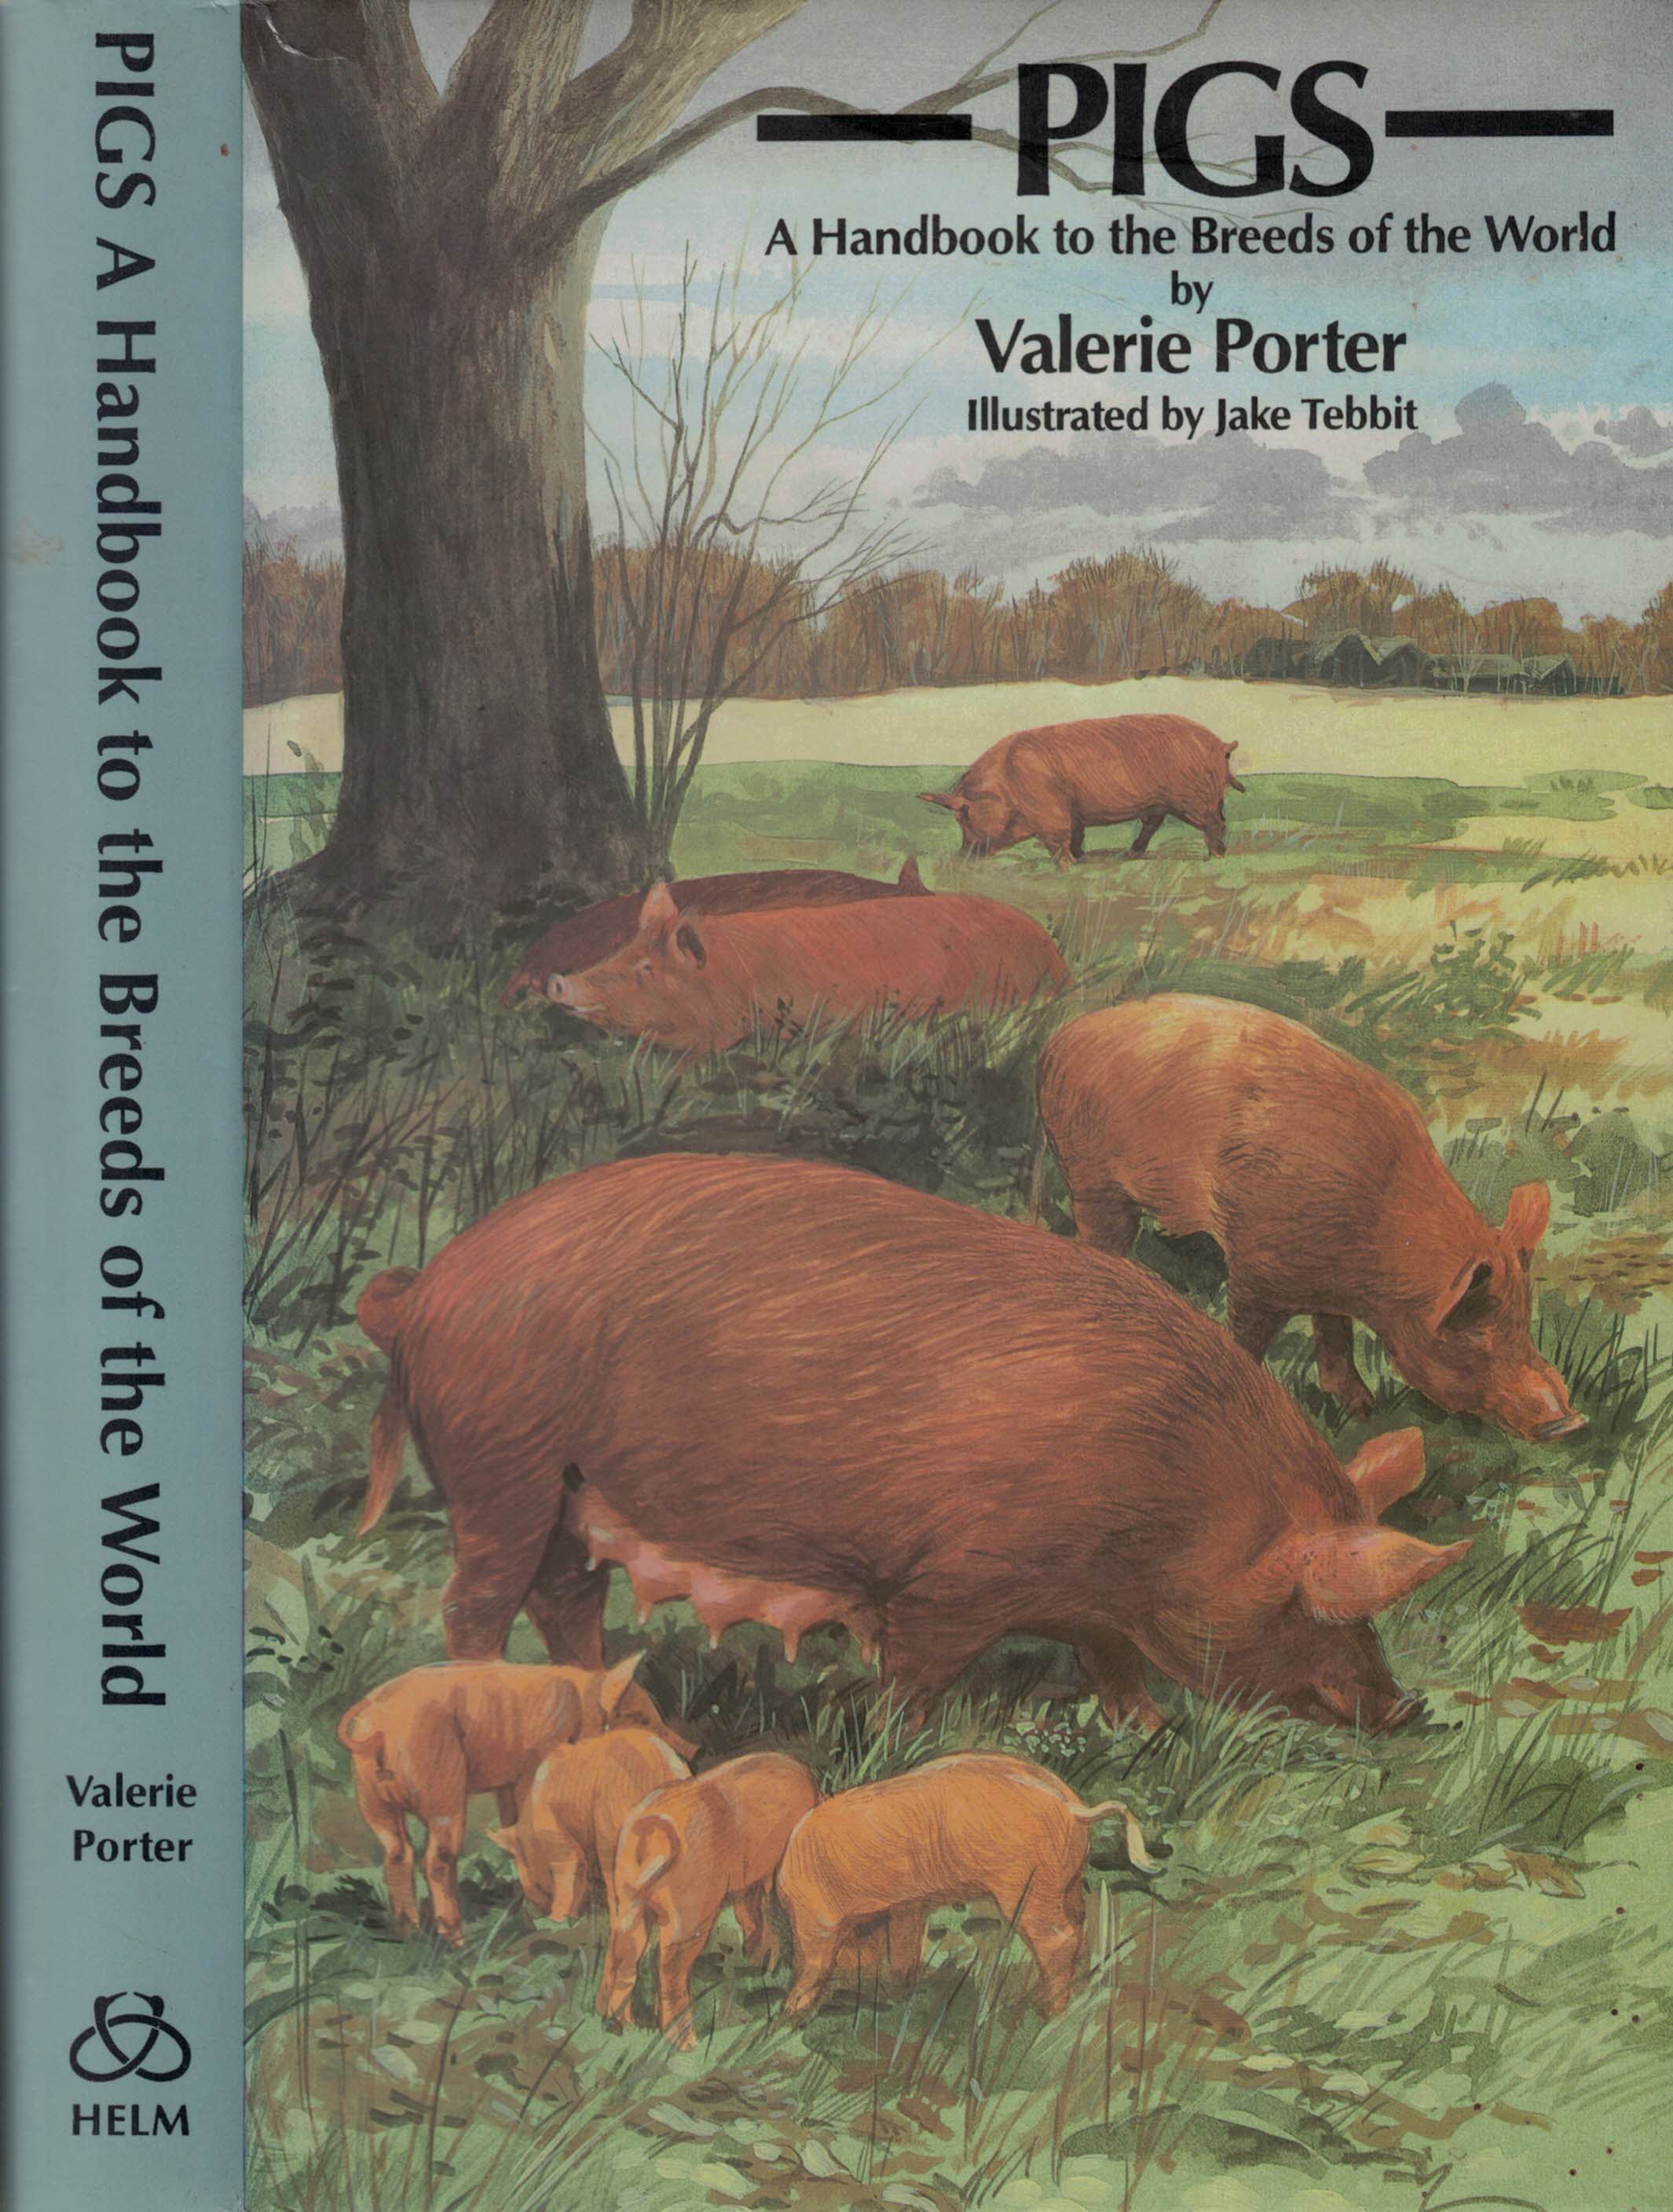 Pigs. A Handbook to the Breeds of the World.